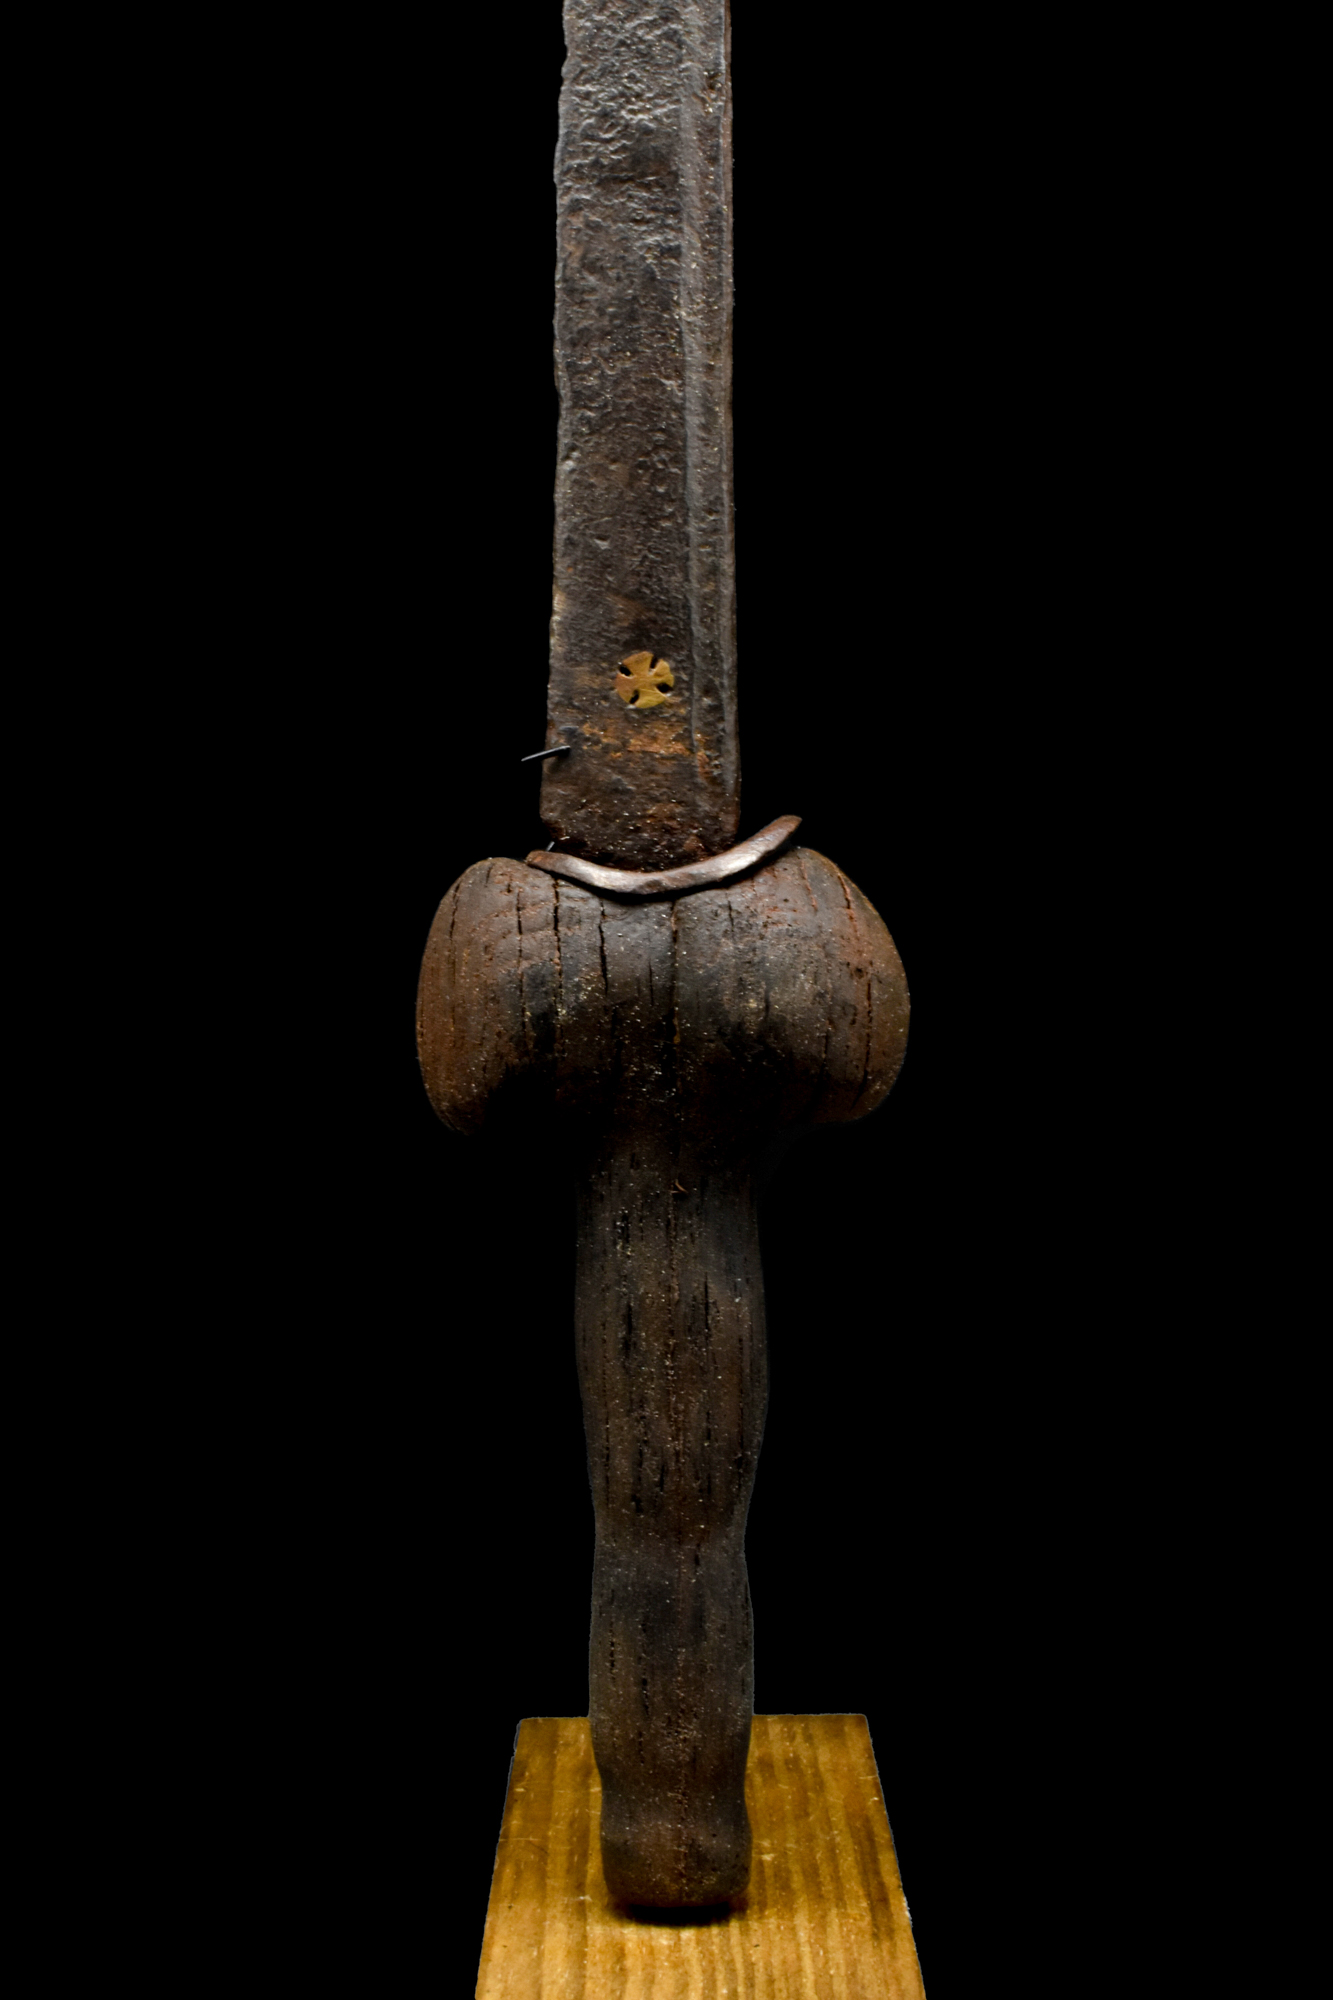 LATE MEDIEVAL BOLLOCK DAGGER / KNIFE WITH GOLD INLAID CROSS - Image 2 of 3